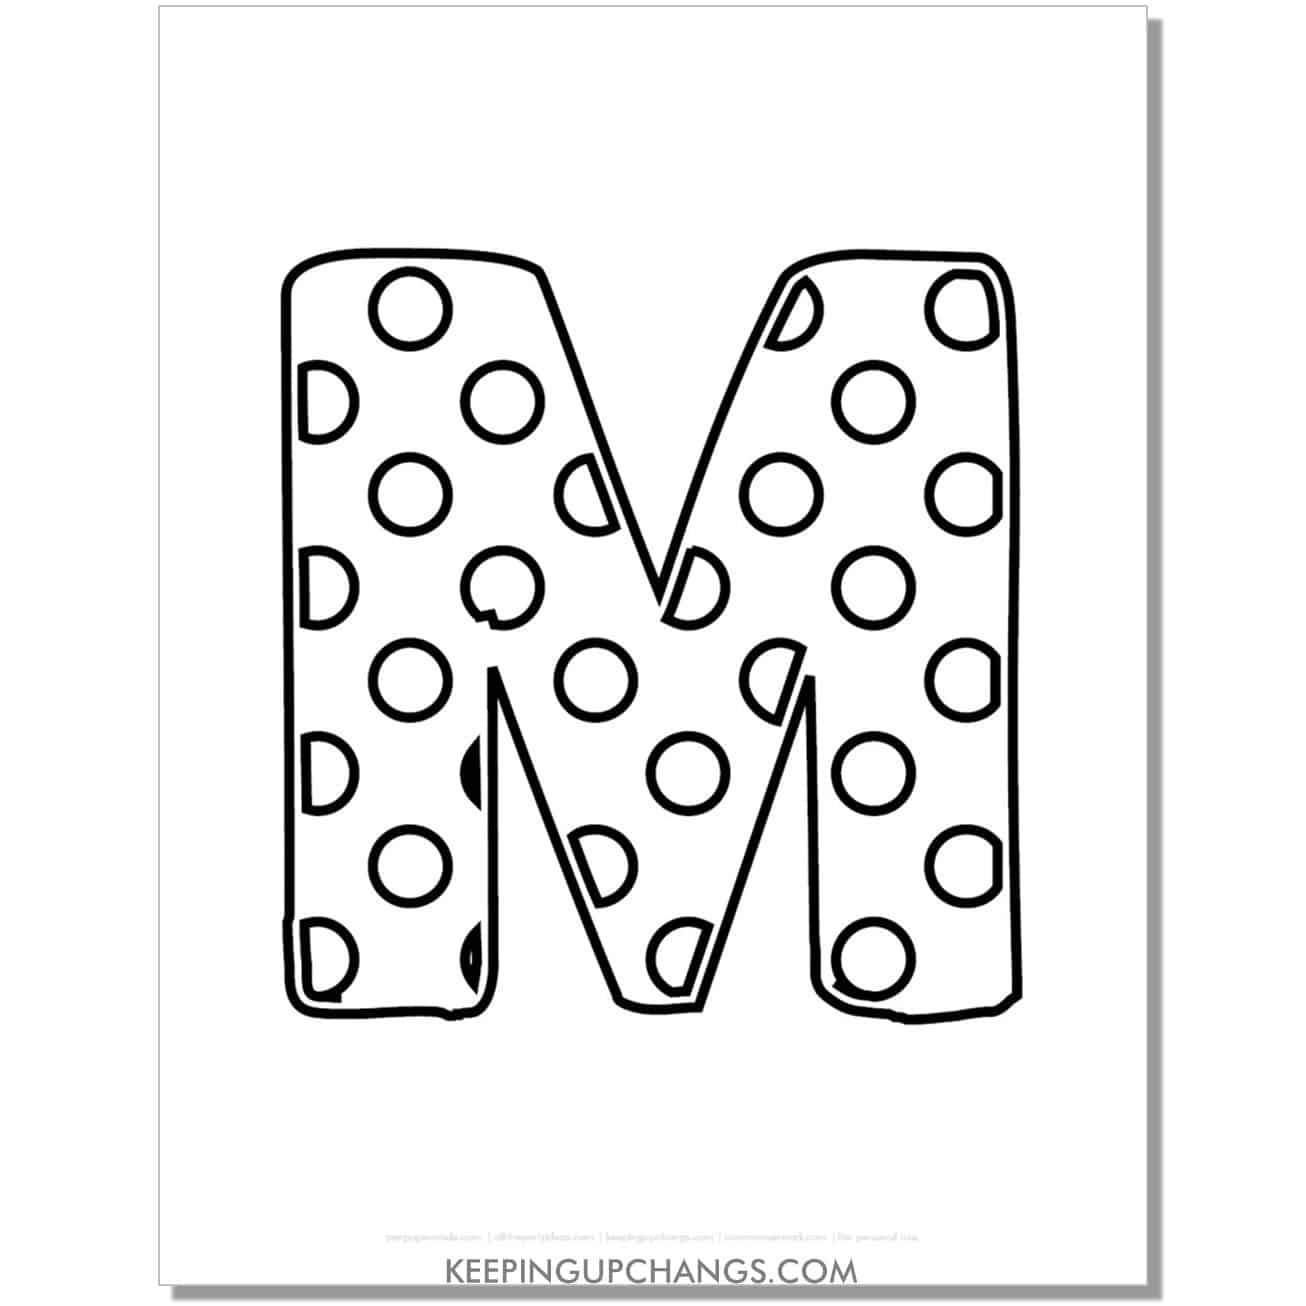 free alphabet letter m coloring page with polka dots for toddlers, preschool, kindergarten.